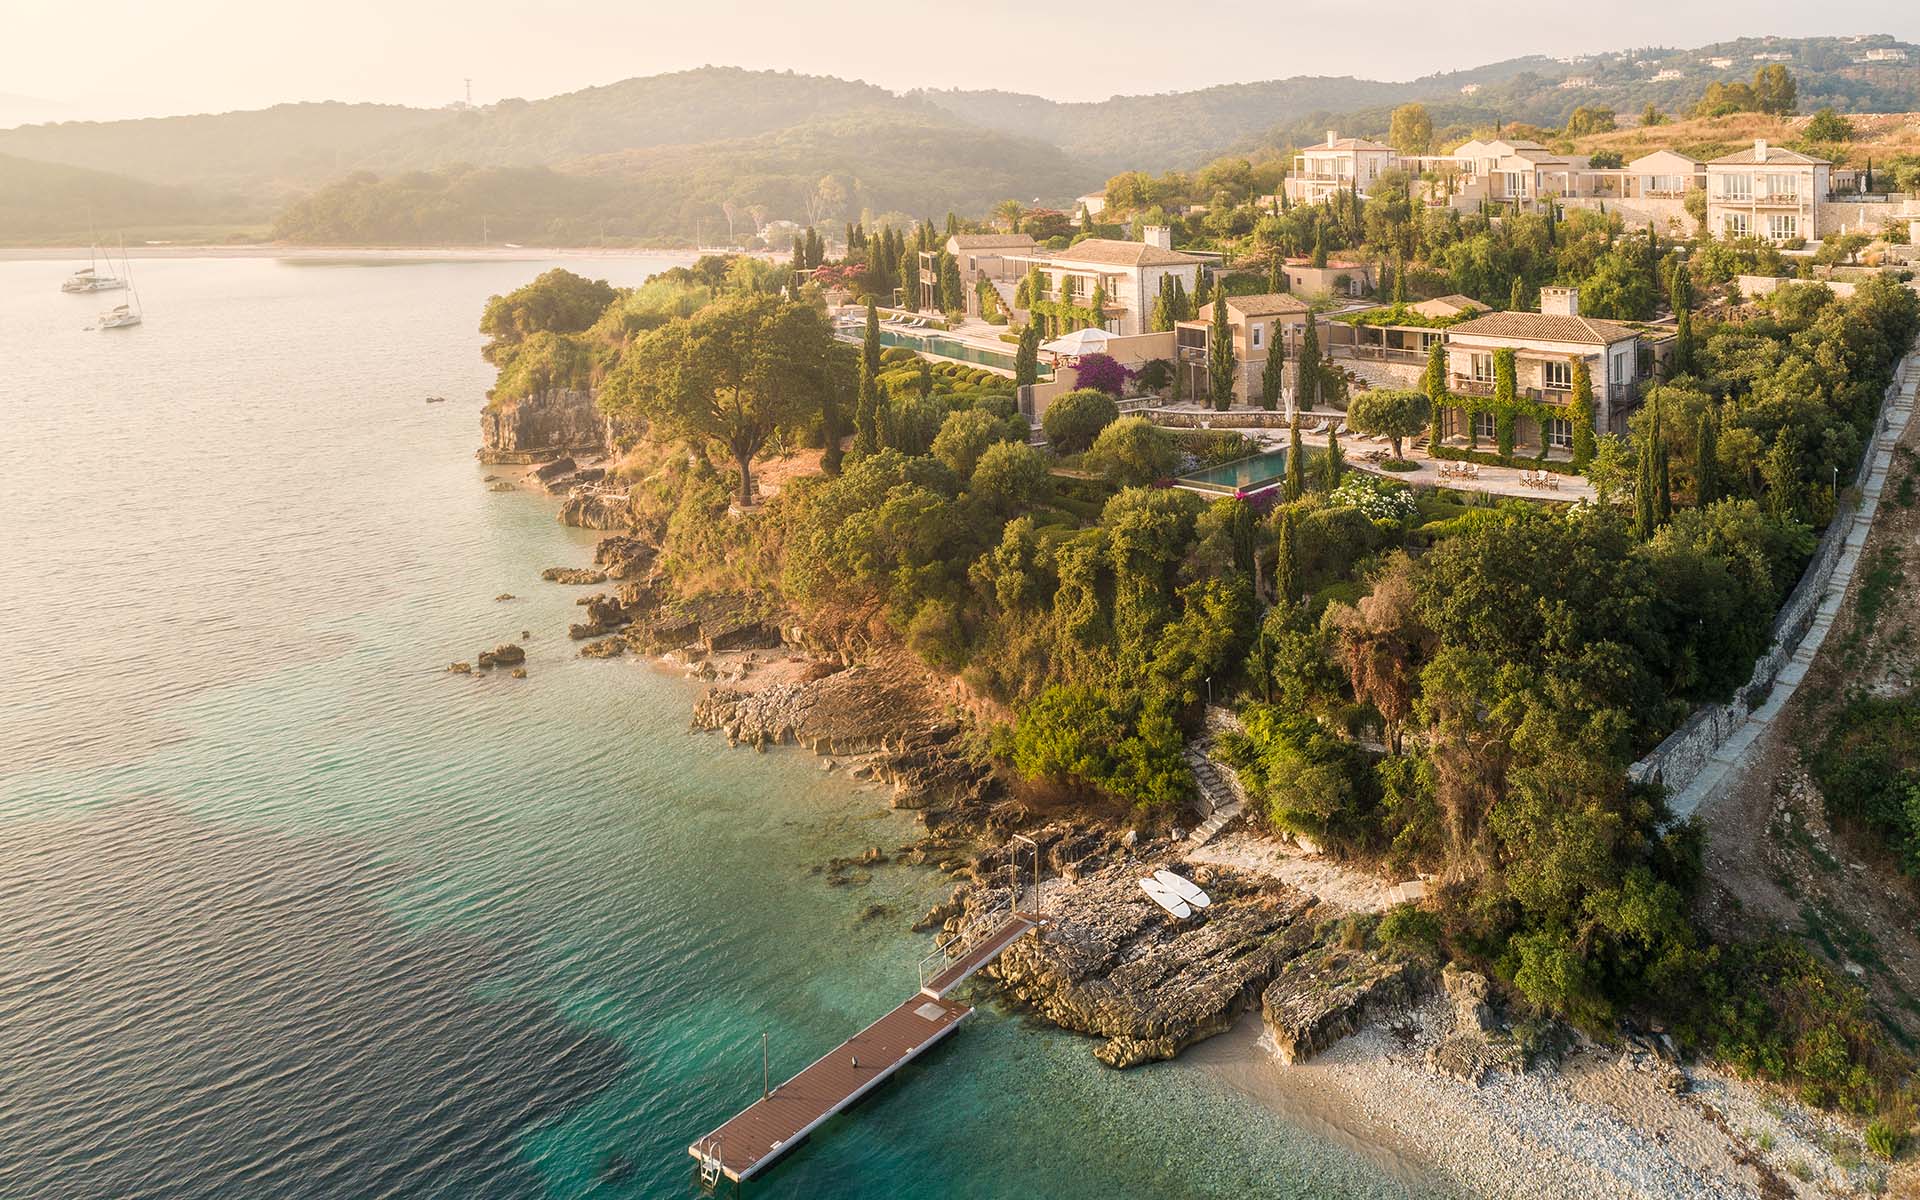 Guide to Corfu: Why it’s my favourite island in Greece